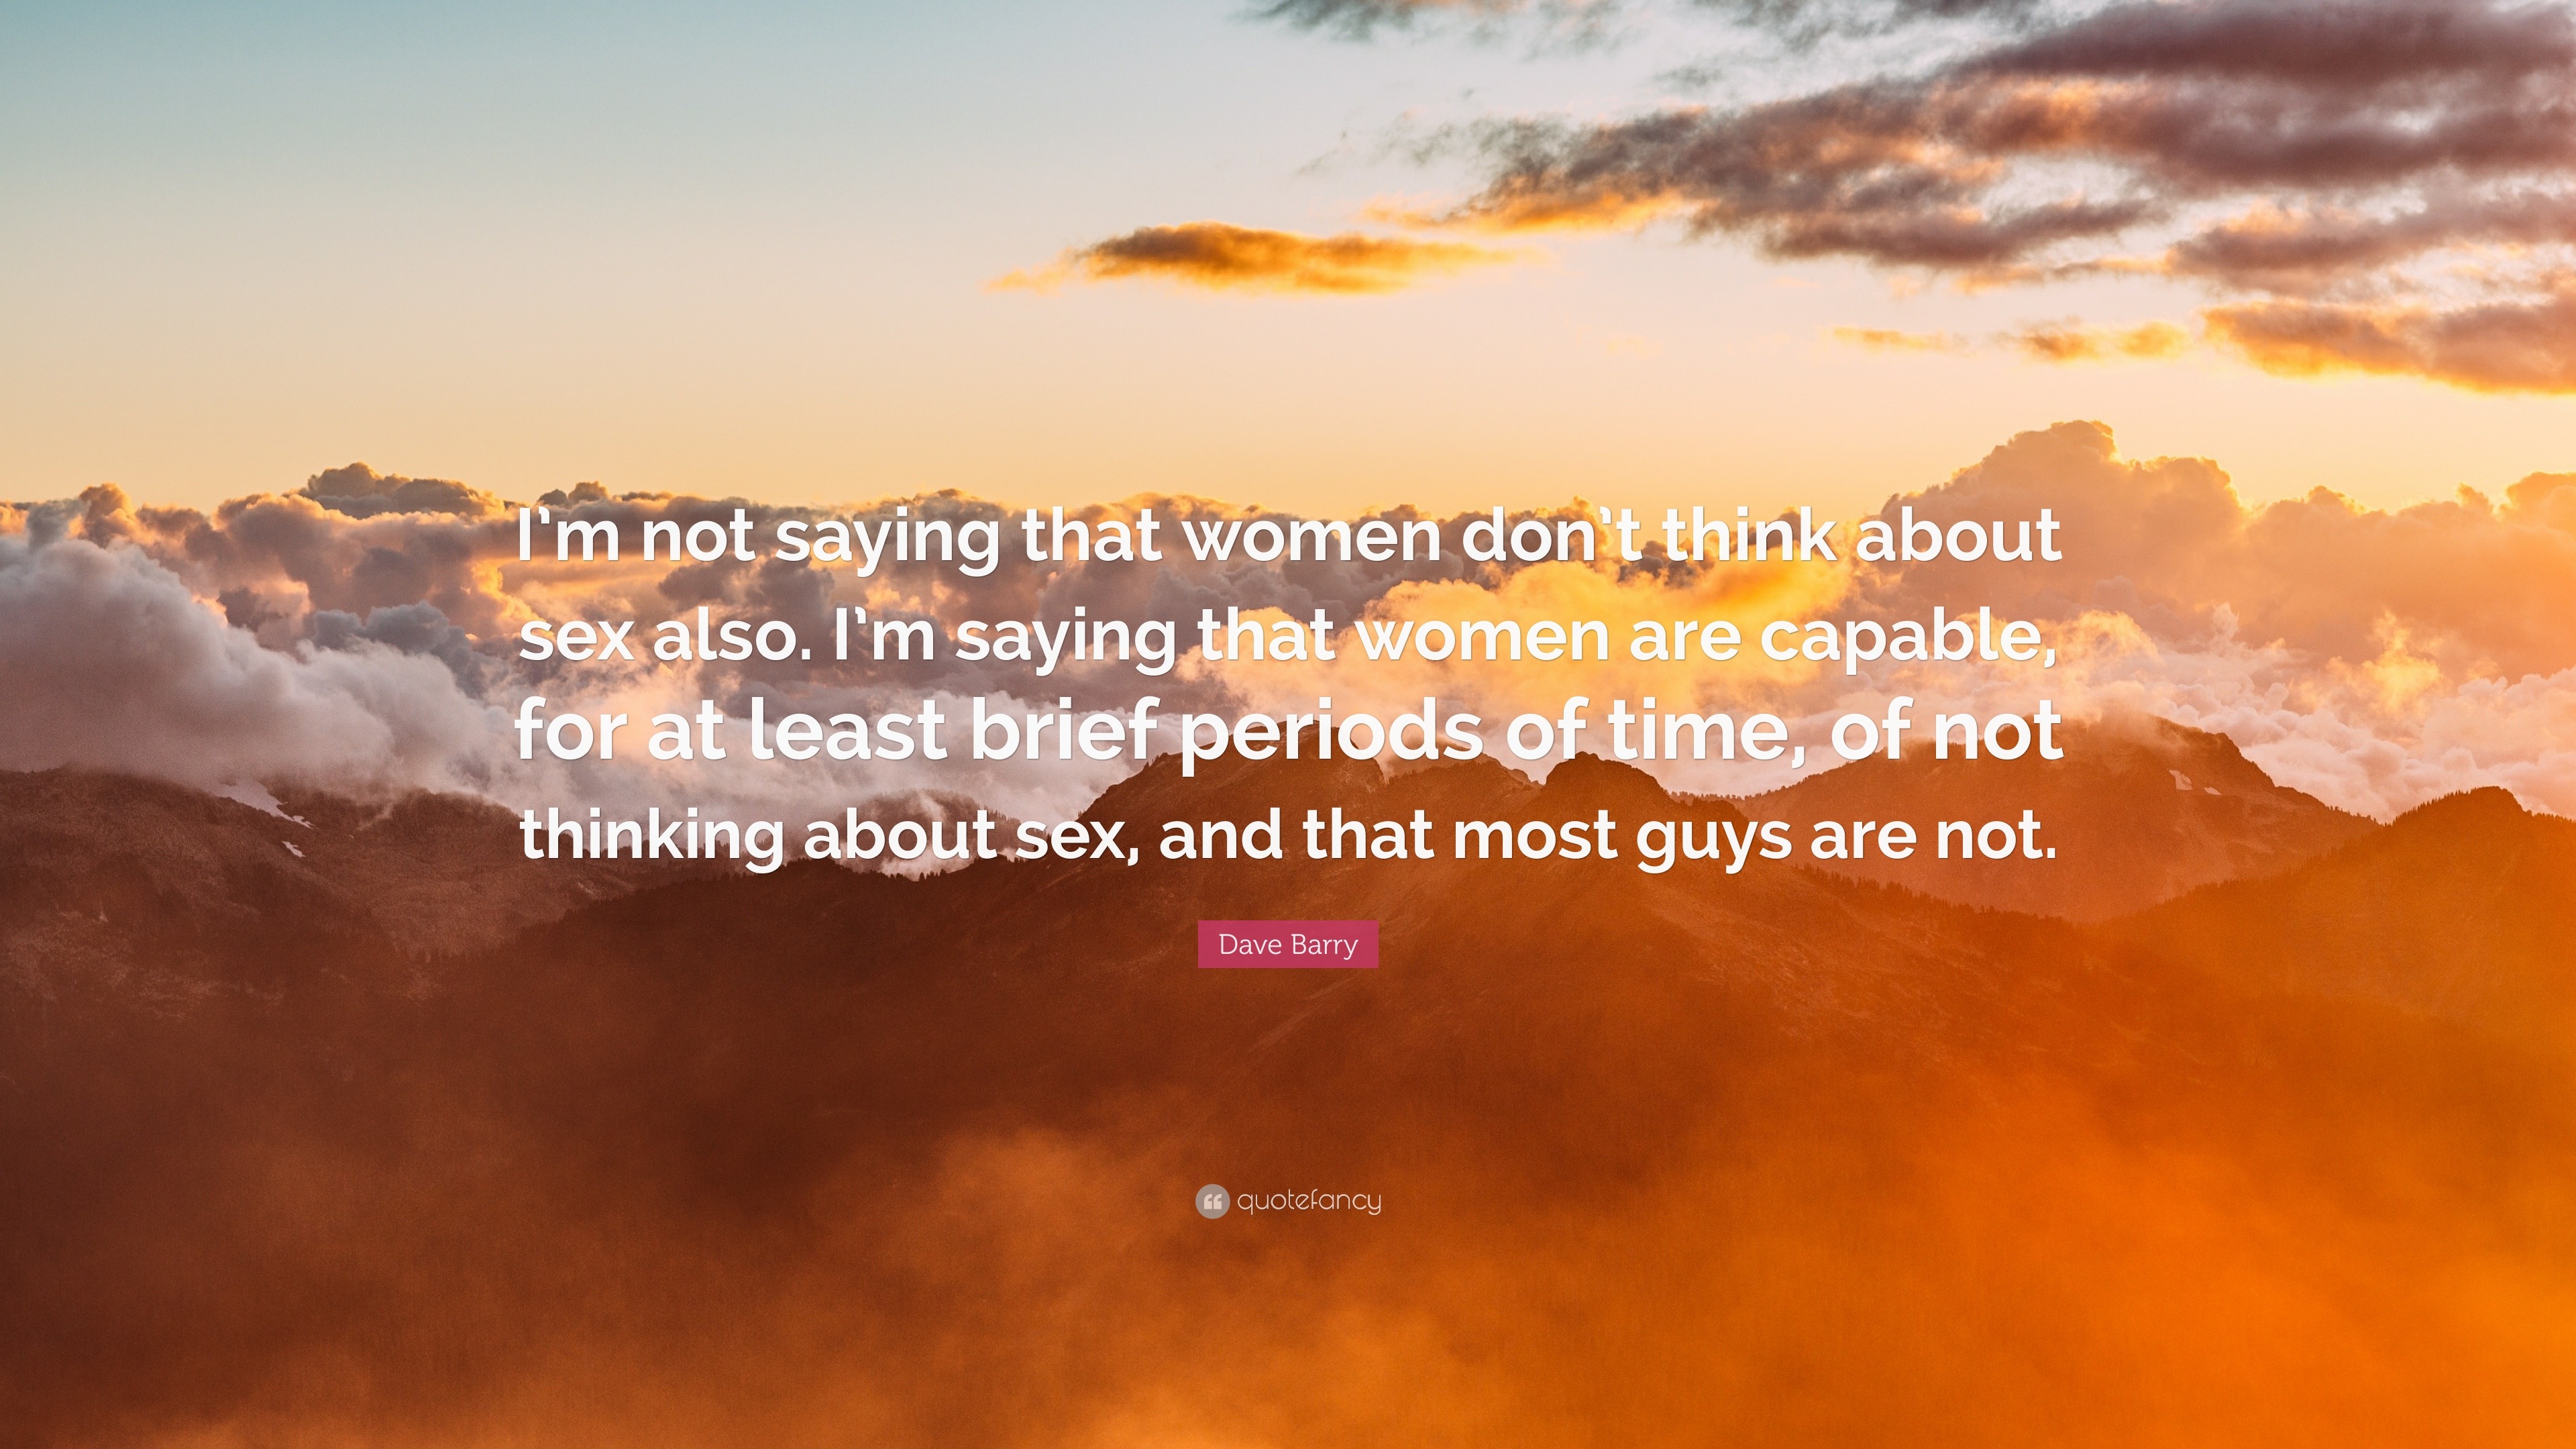 Dave Barry Quote: “What women want: To be loved, to be listened to